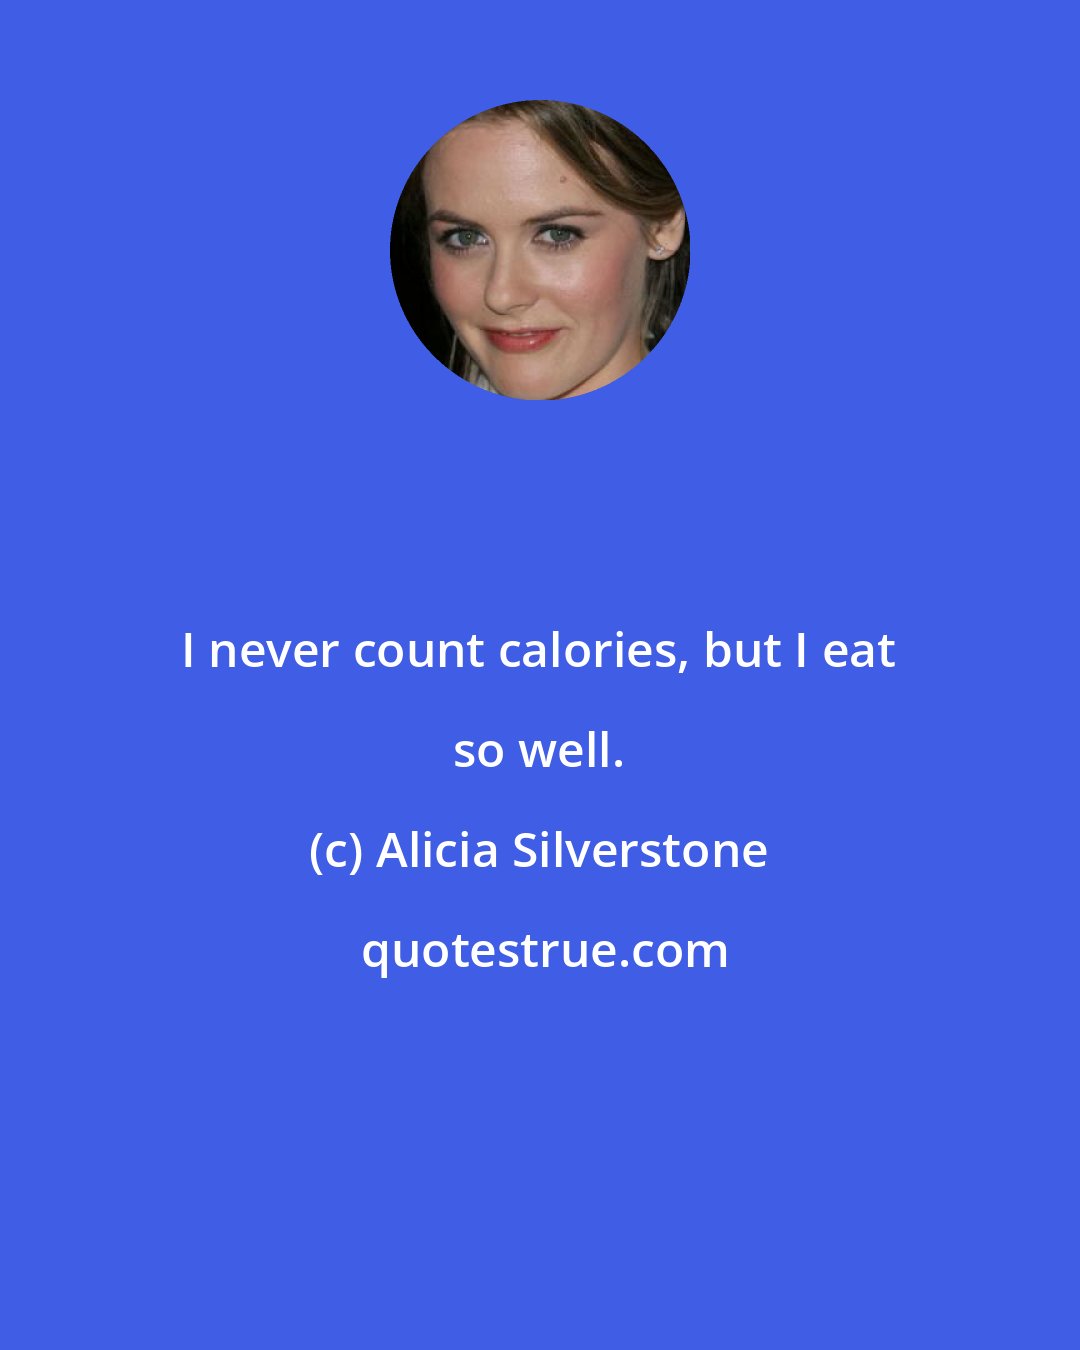 Alicia Silverstone: I never count calories, but I eat so well.